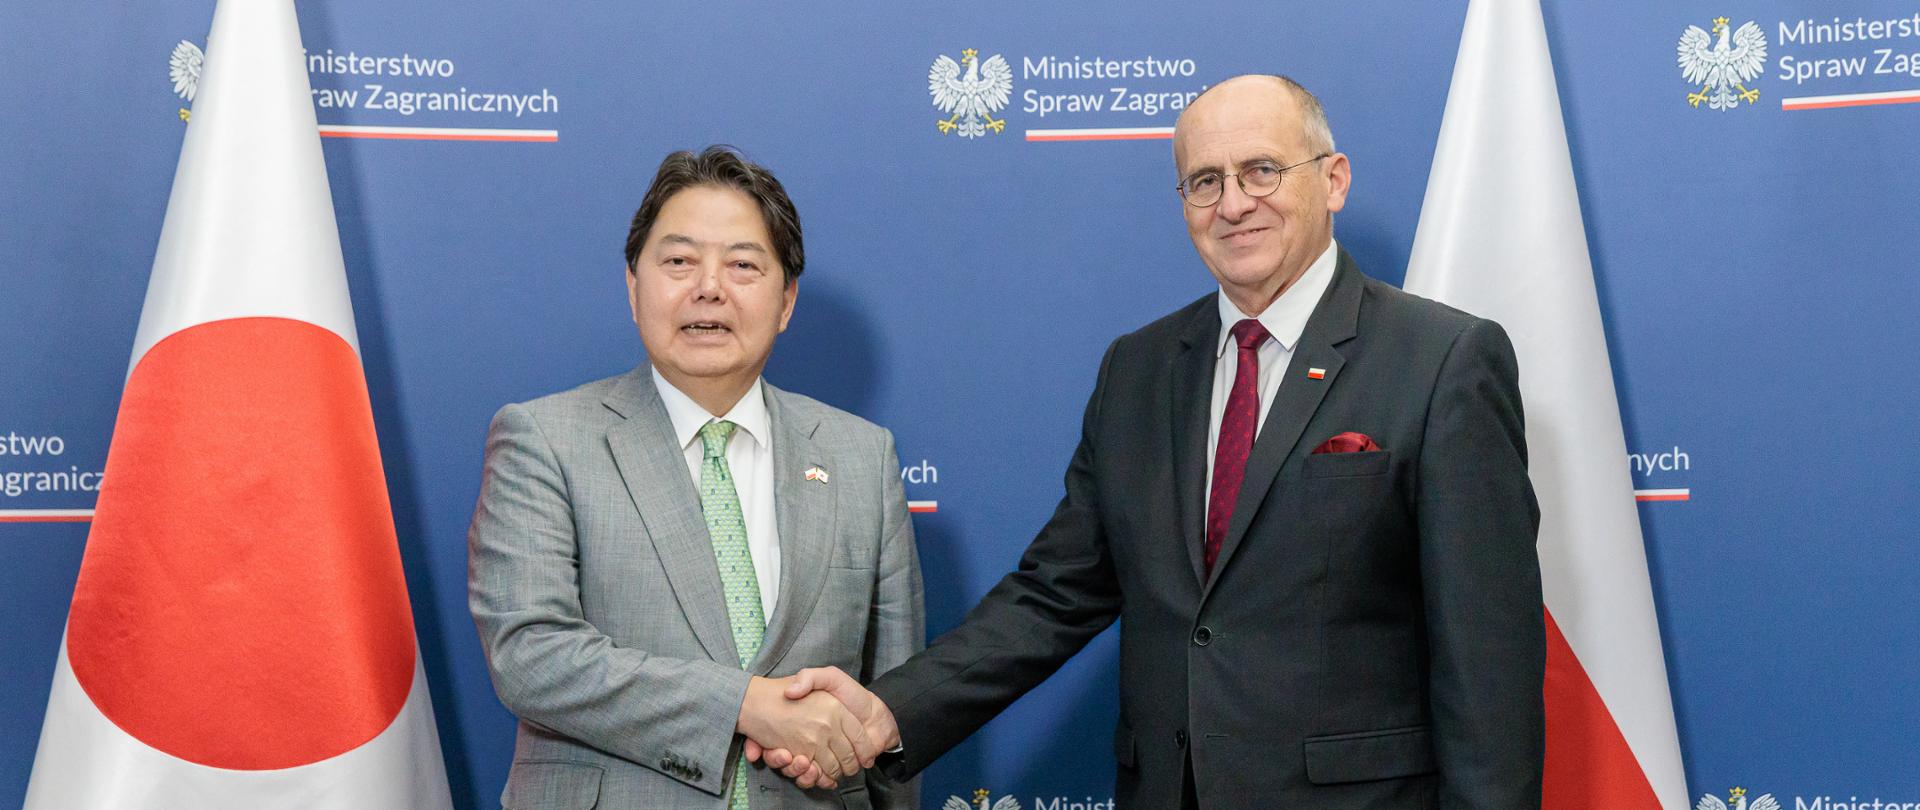 Meeting of foreign ministers of Poland and Japan